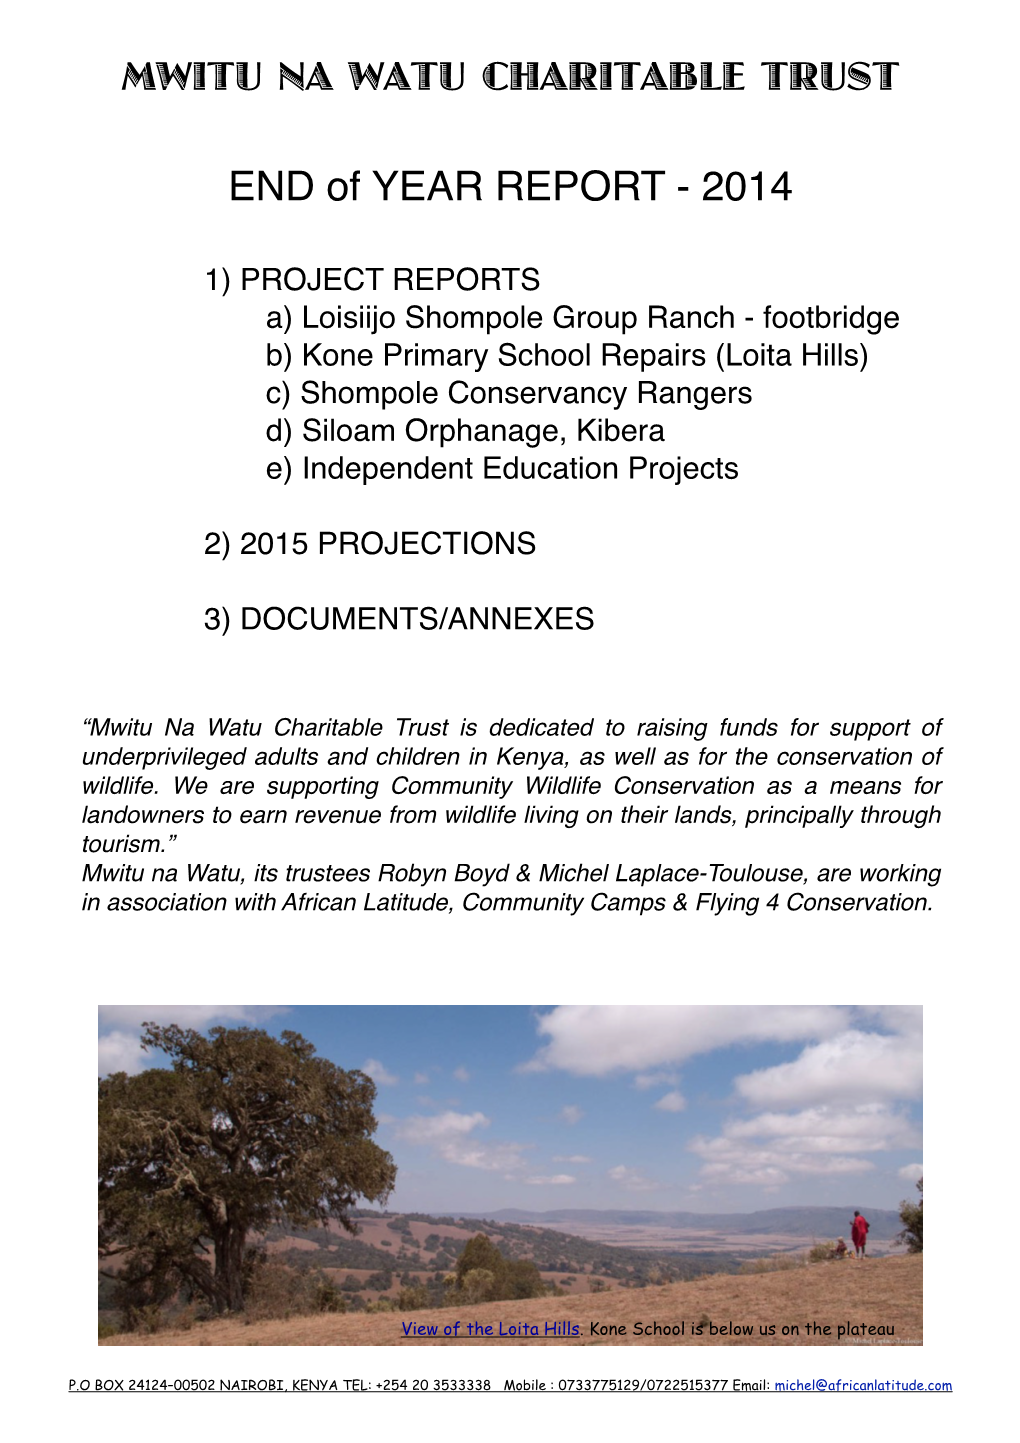 End of Year Report 2014